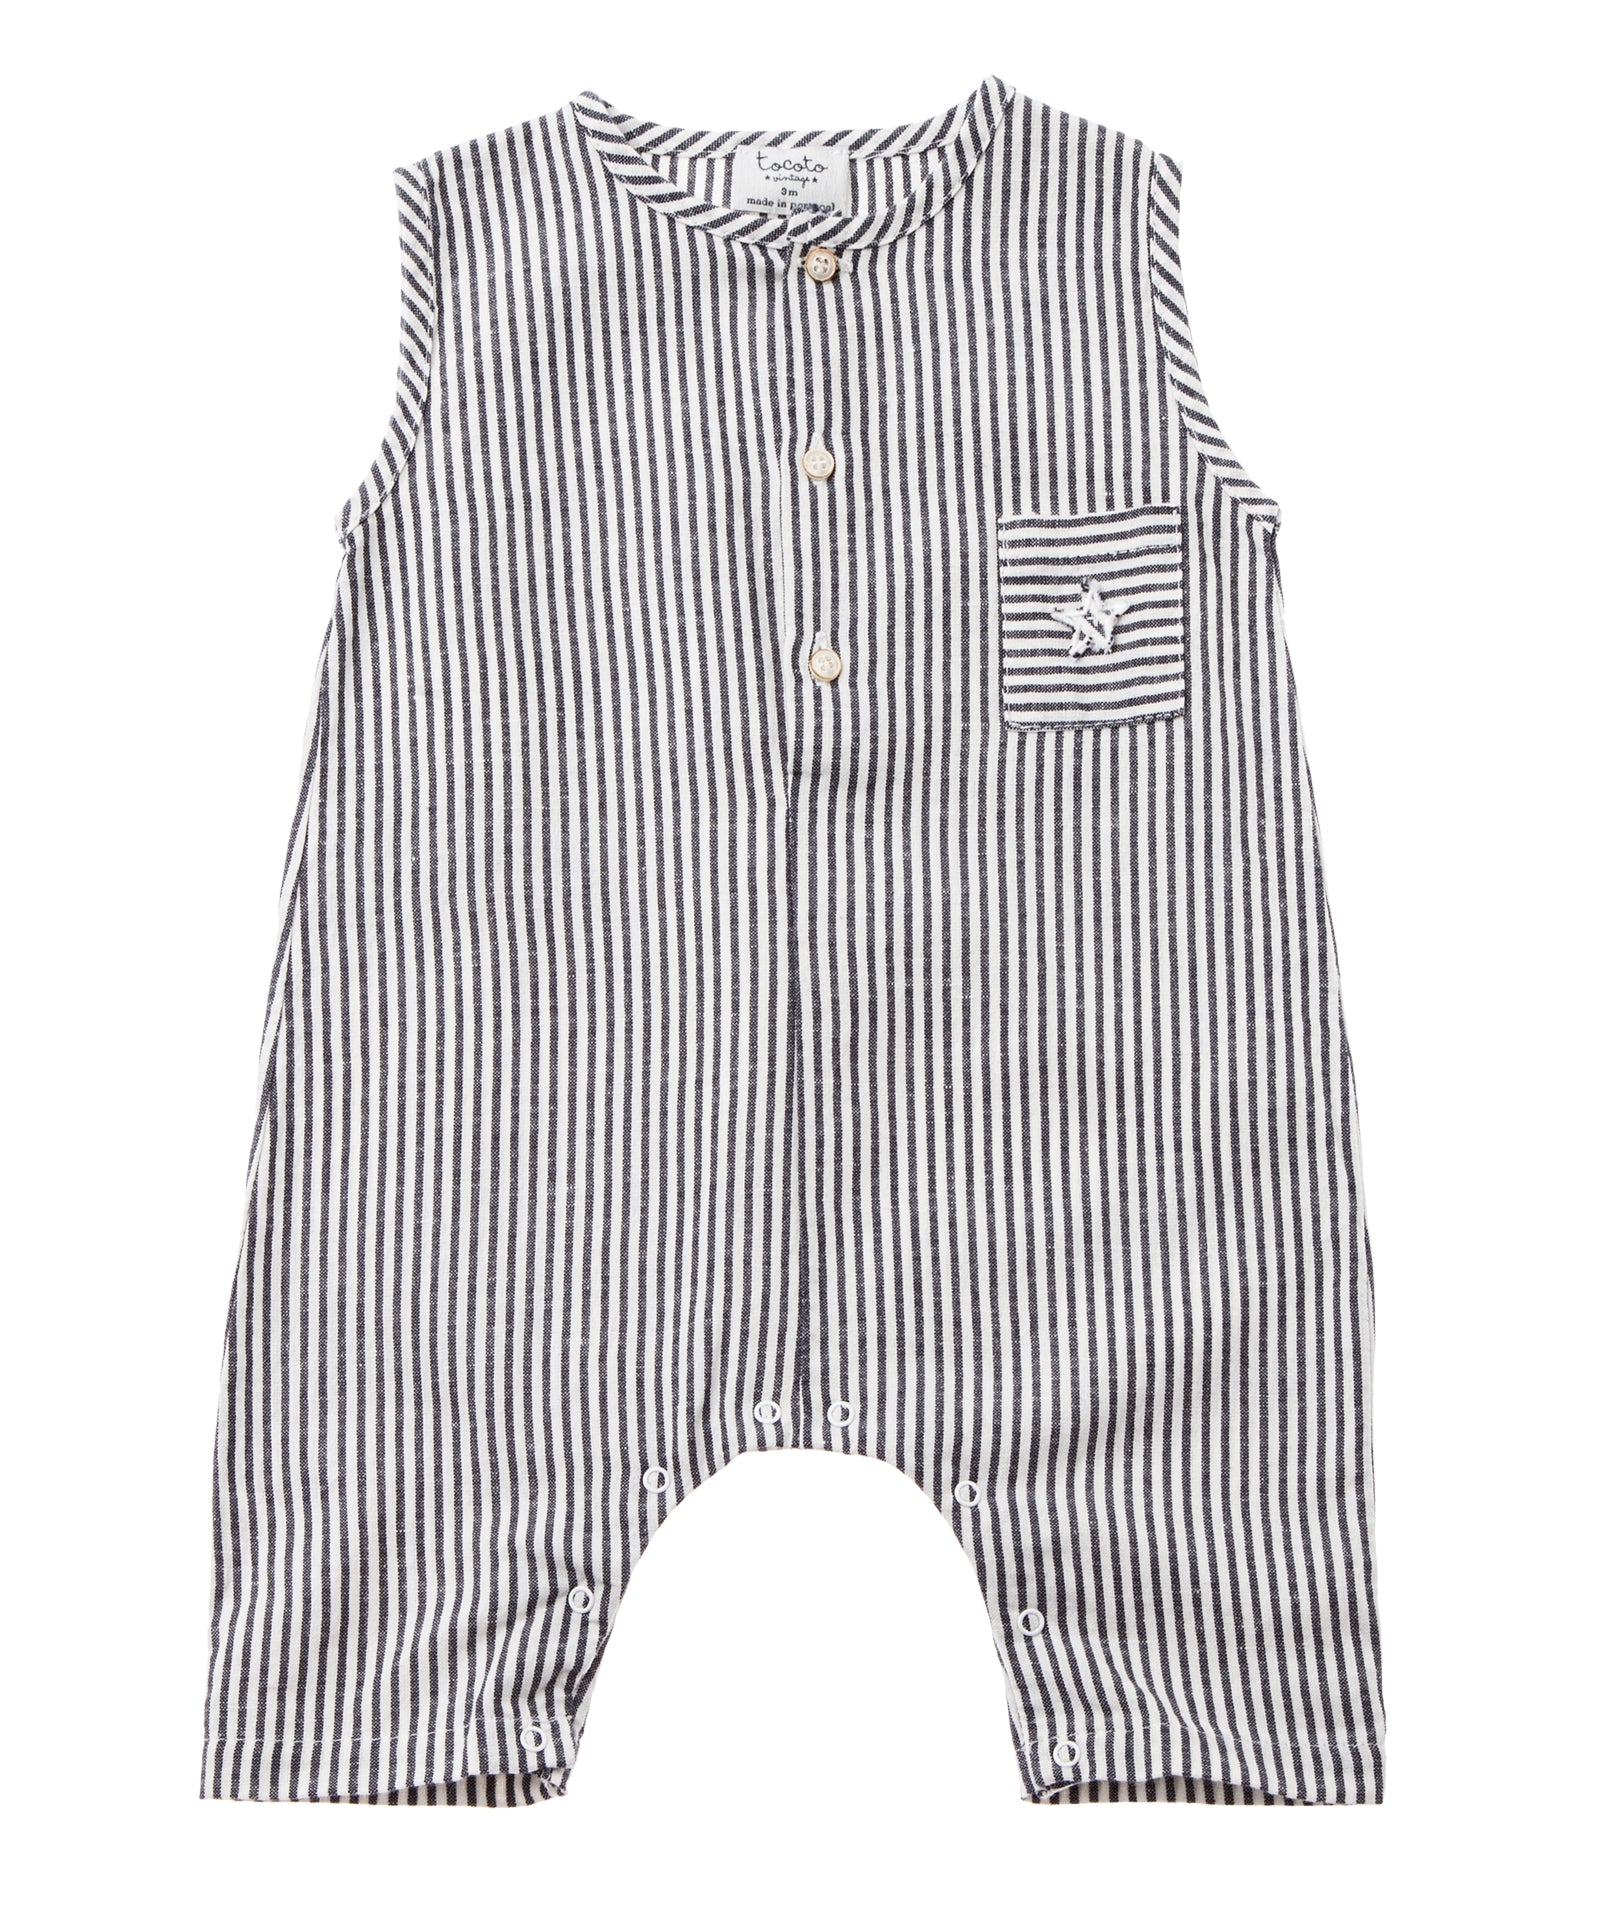 Tocoto Vintage Baby Jumpsuit - Navy